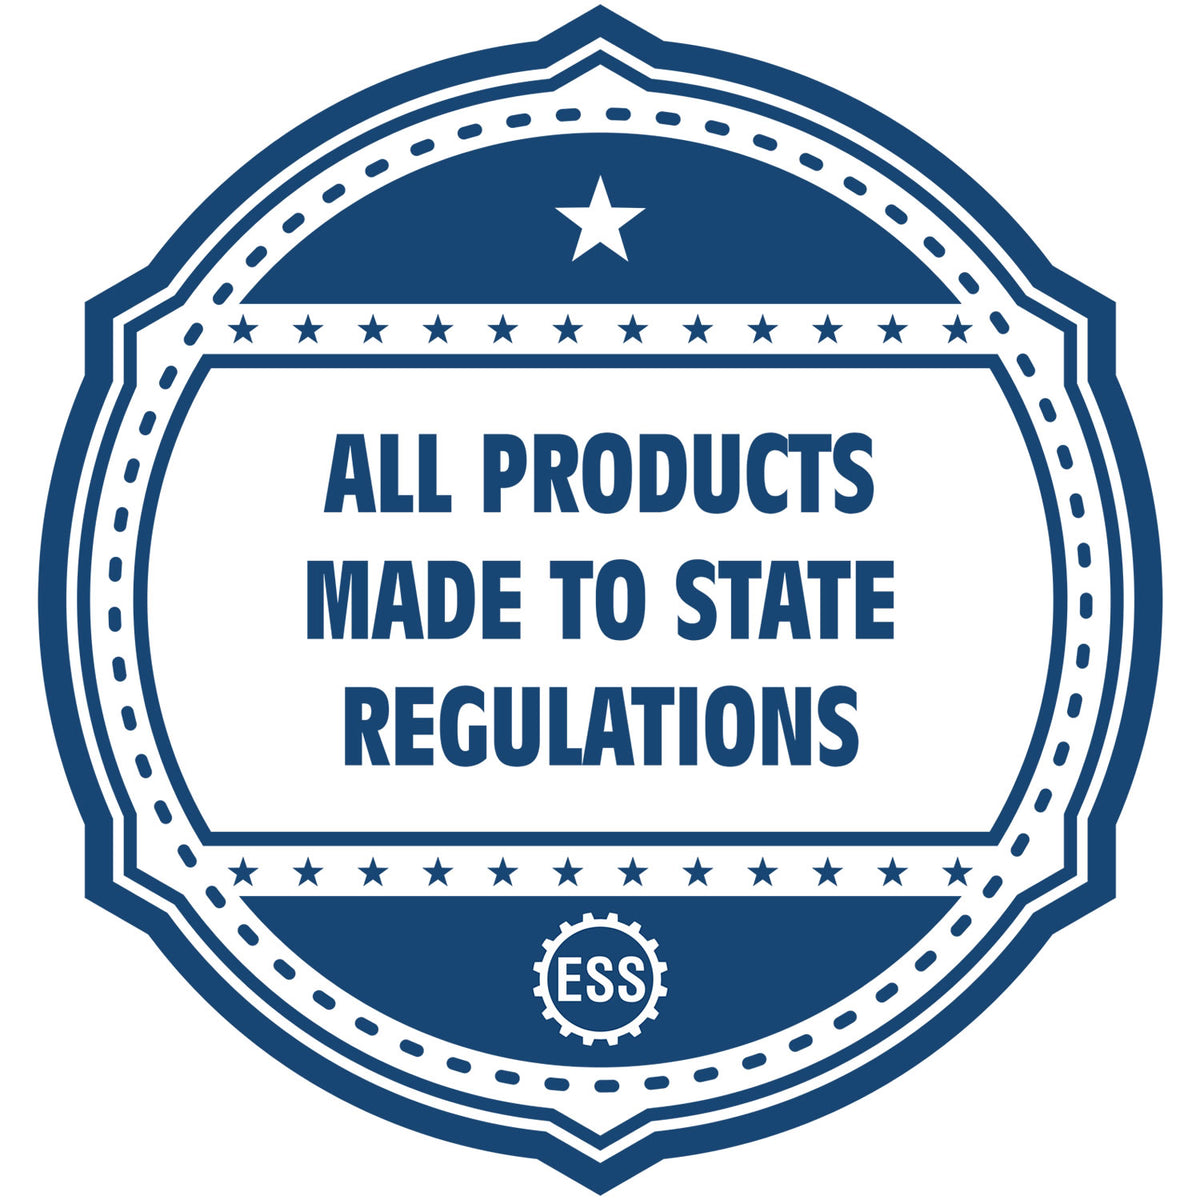 An icon or badge element for the Long Reach Illinois PE Seal showing that this product is made in compliance with state regulations.